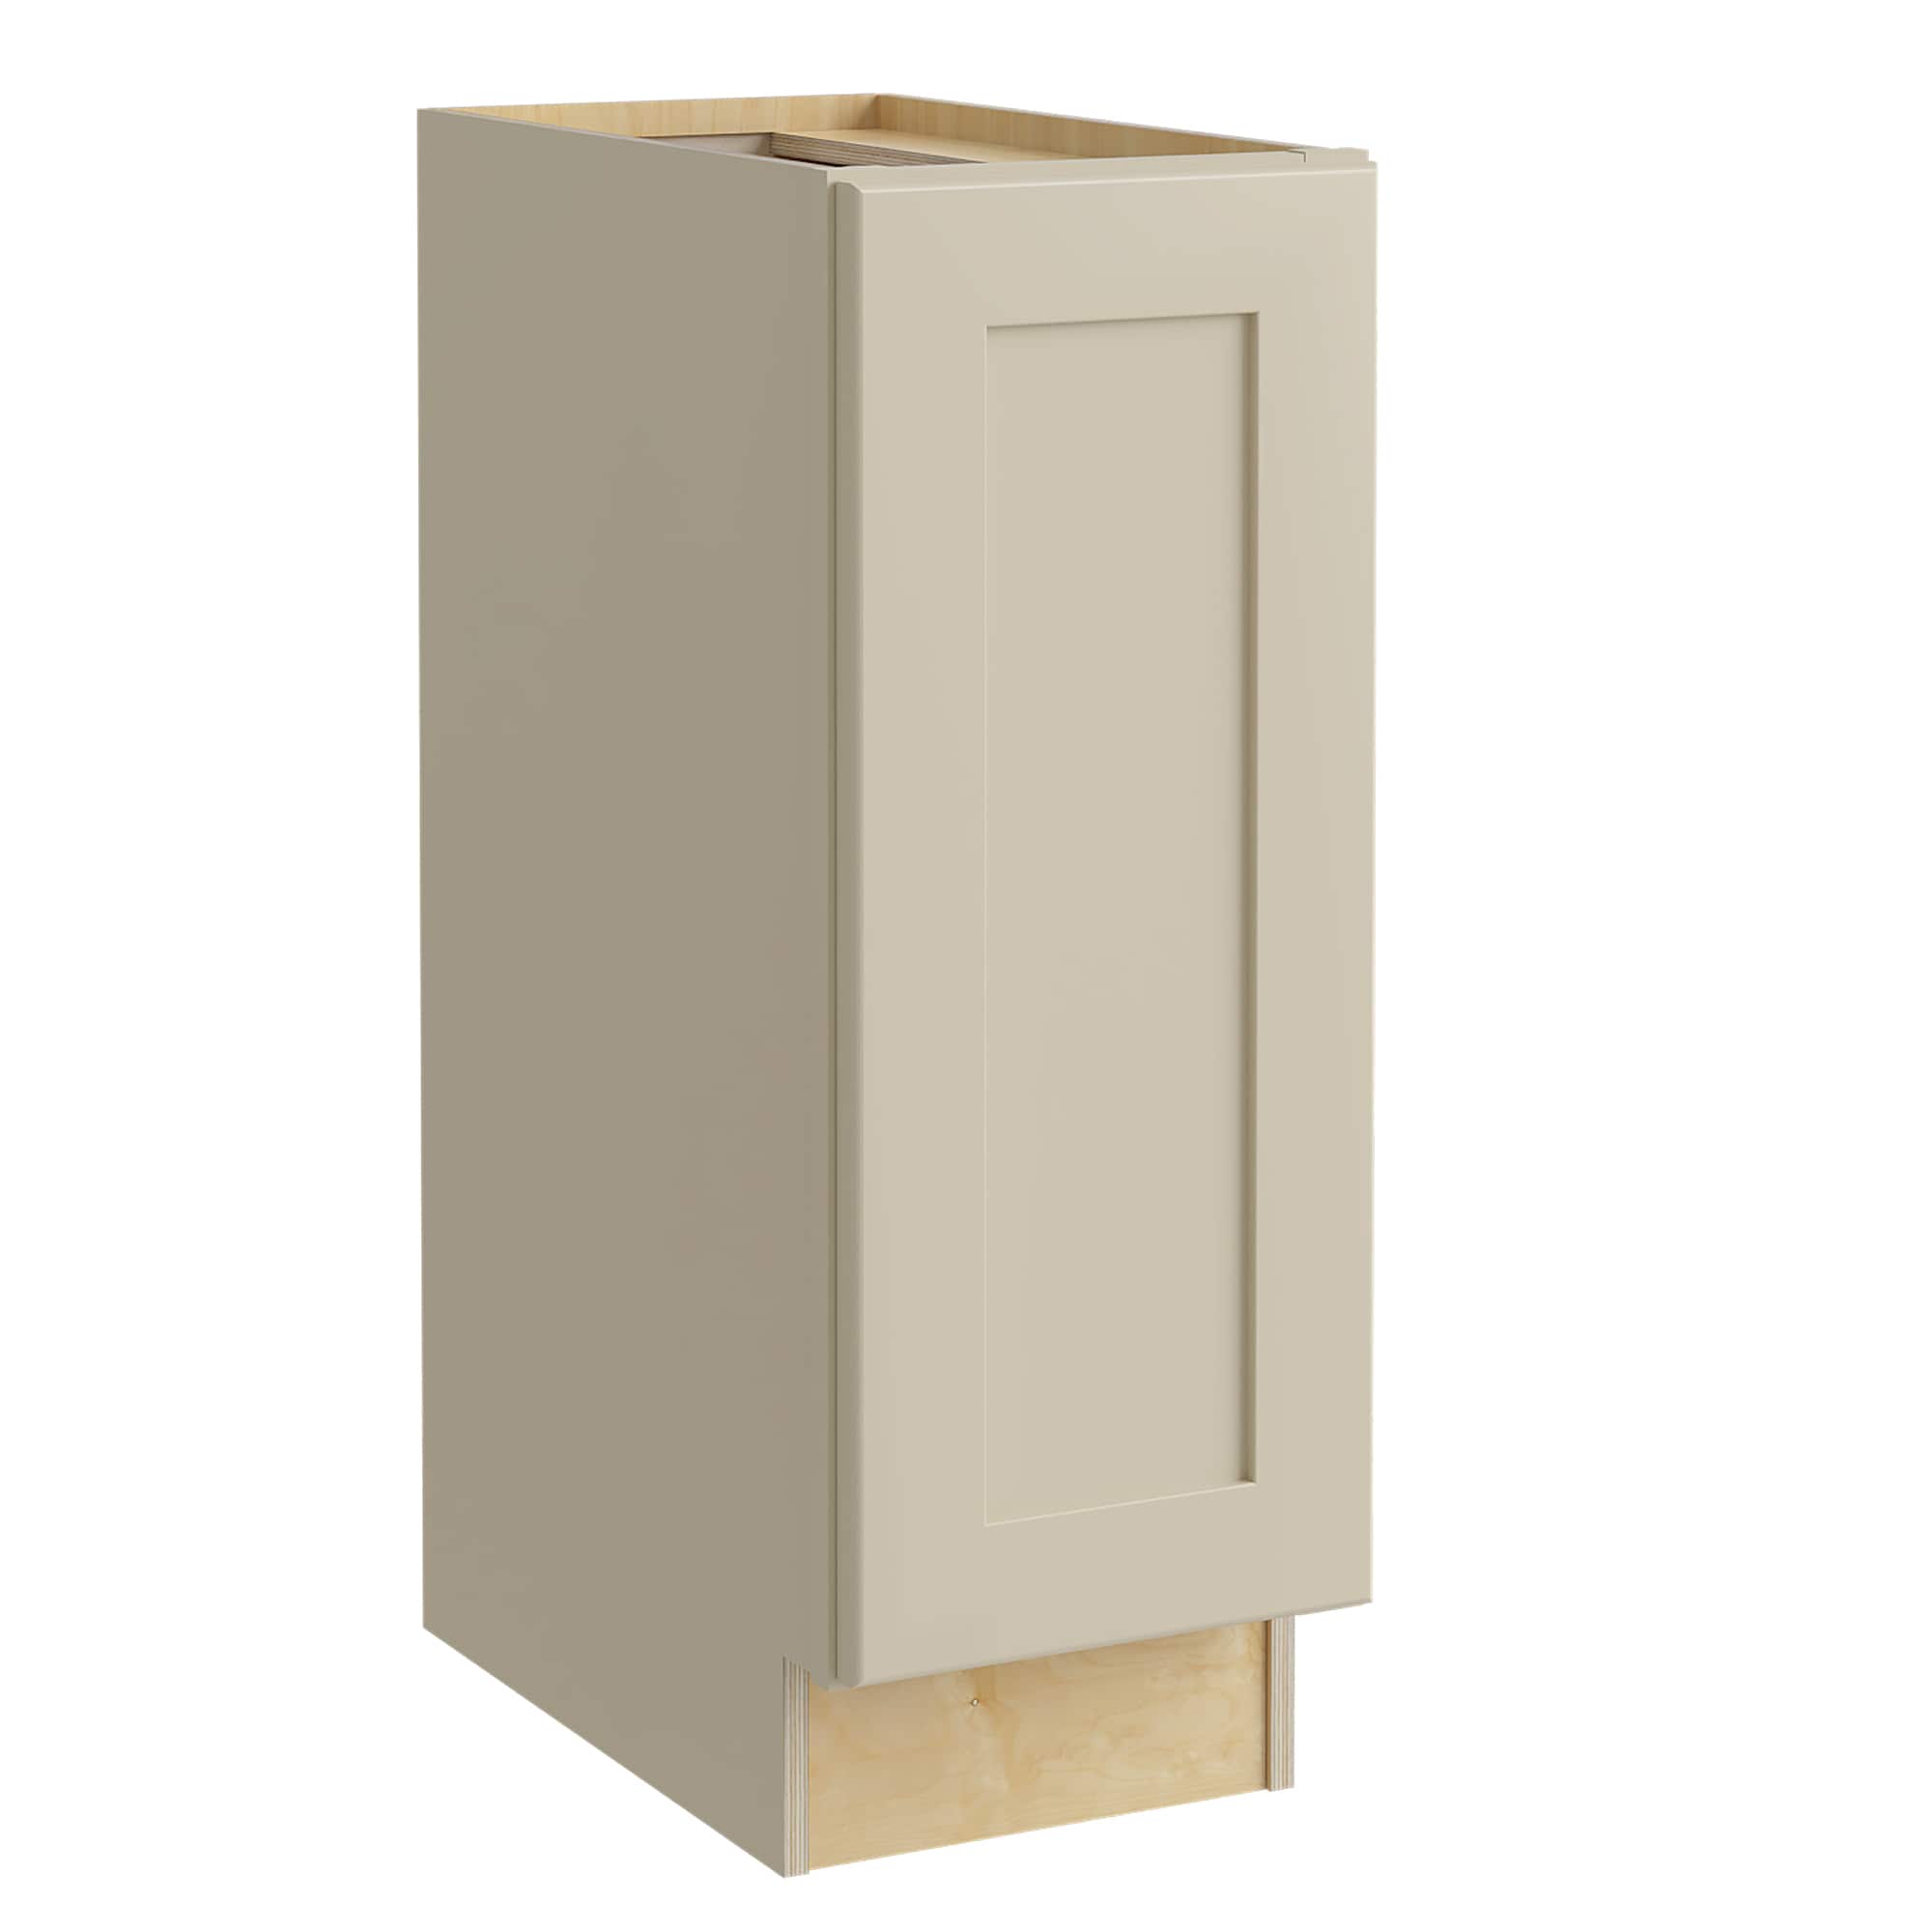 Luxxe Cabinetry 15-in W x 34.5-in H x 21-in D Norfolk Blended Cream Painted Door Base Fully Assembled Semi-custom Cabinet in Off-White | VB1521FHR-NBC